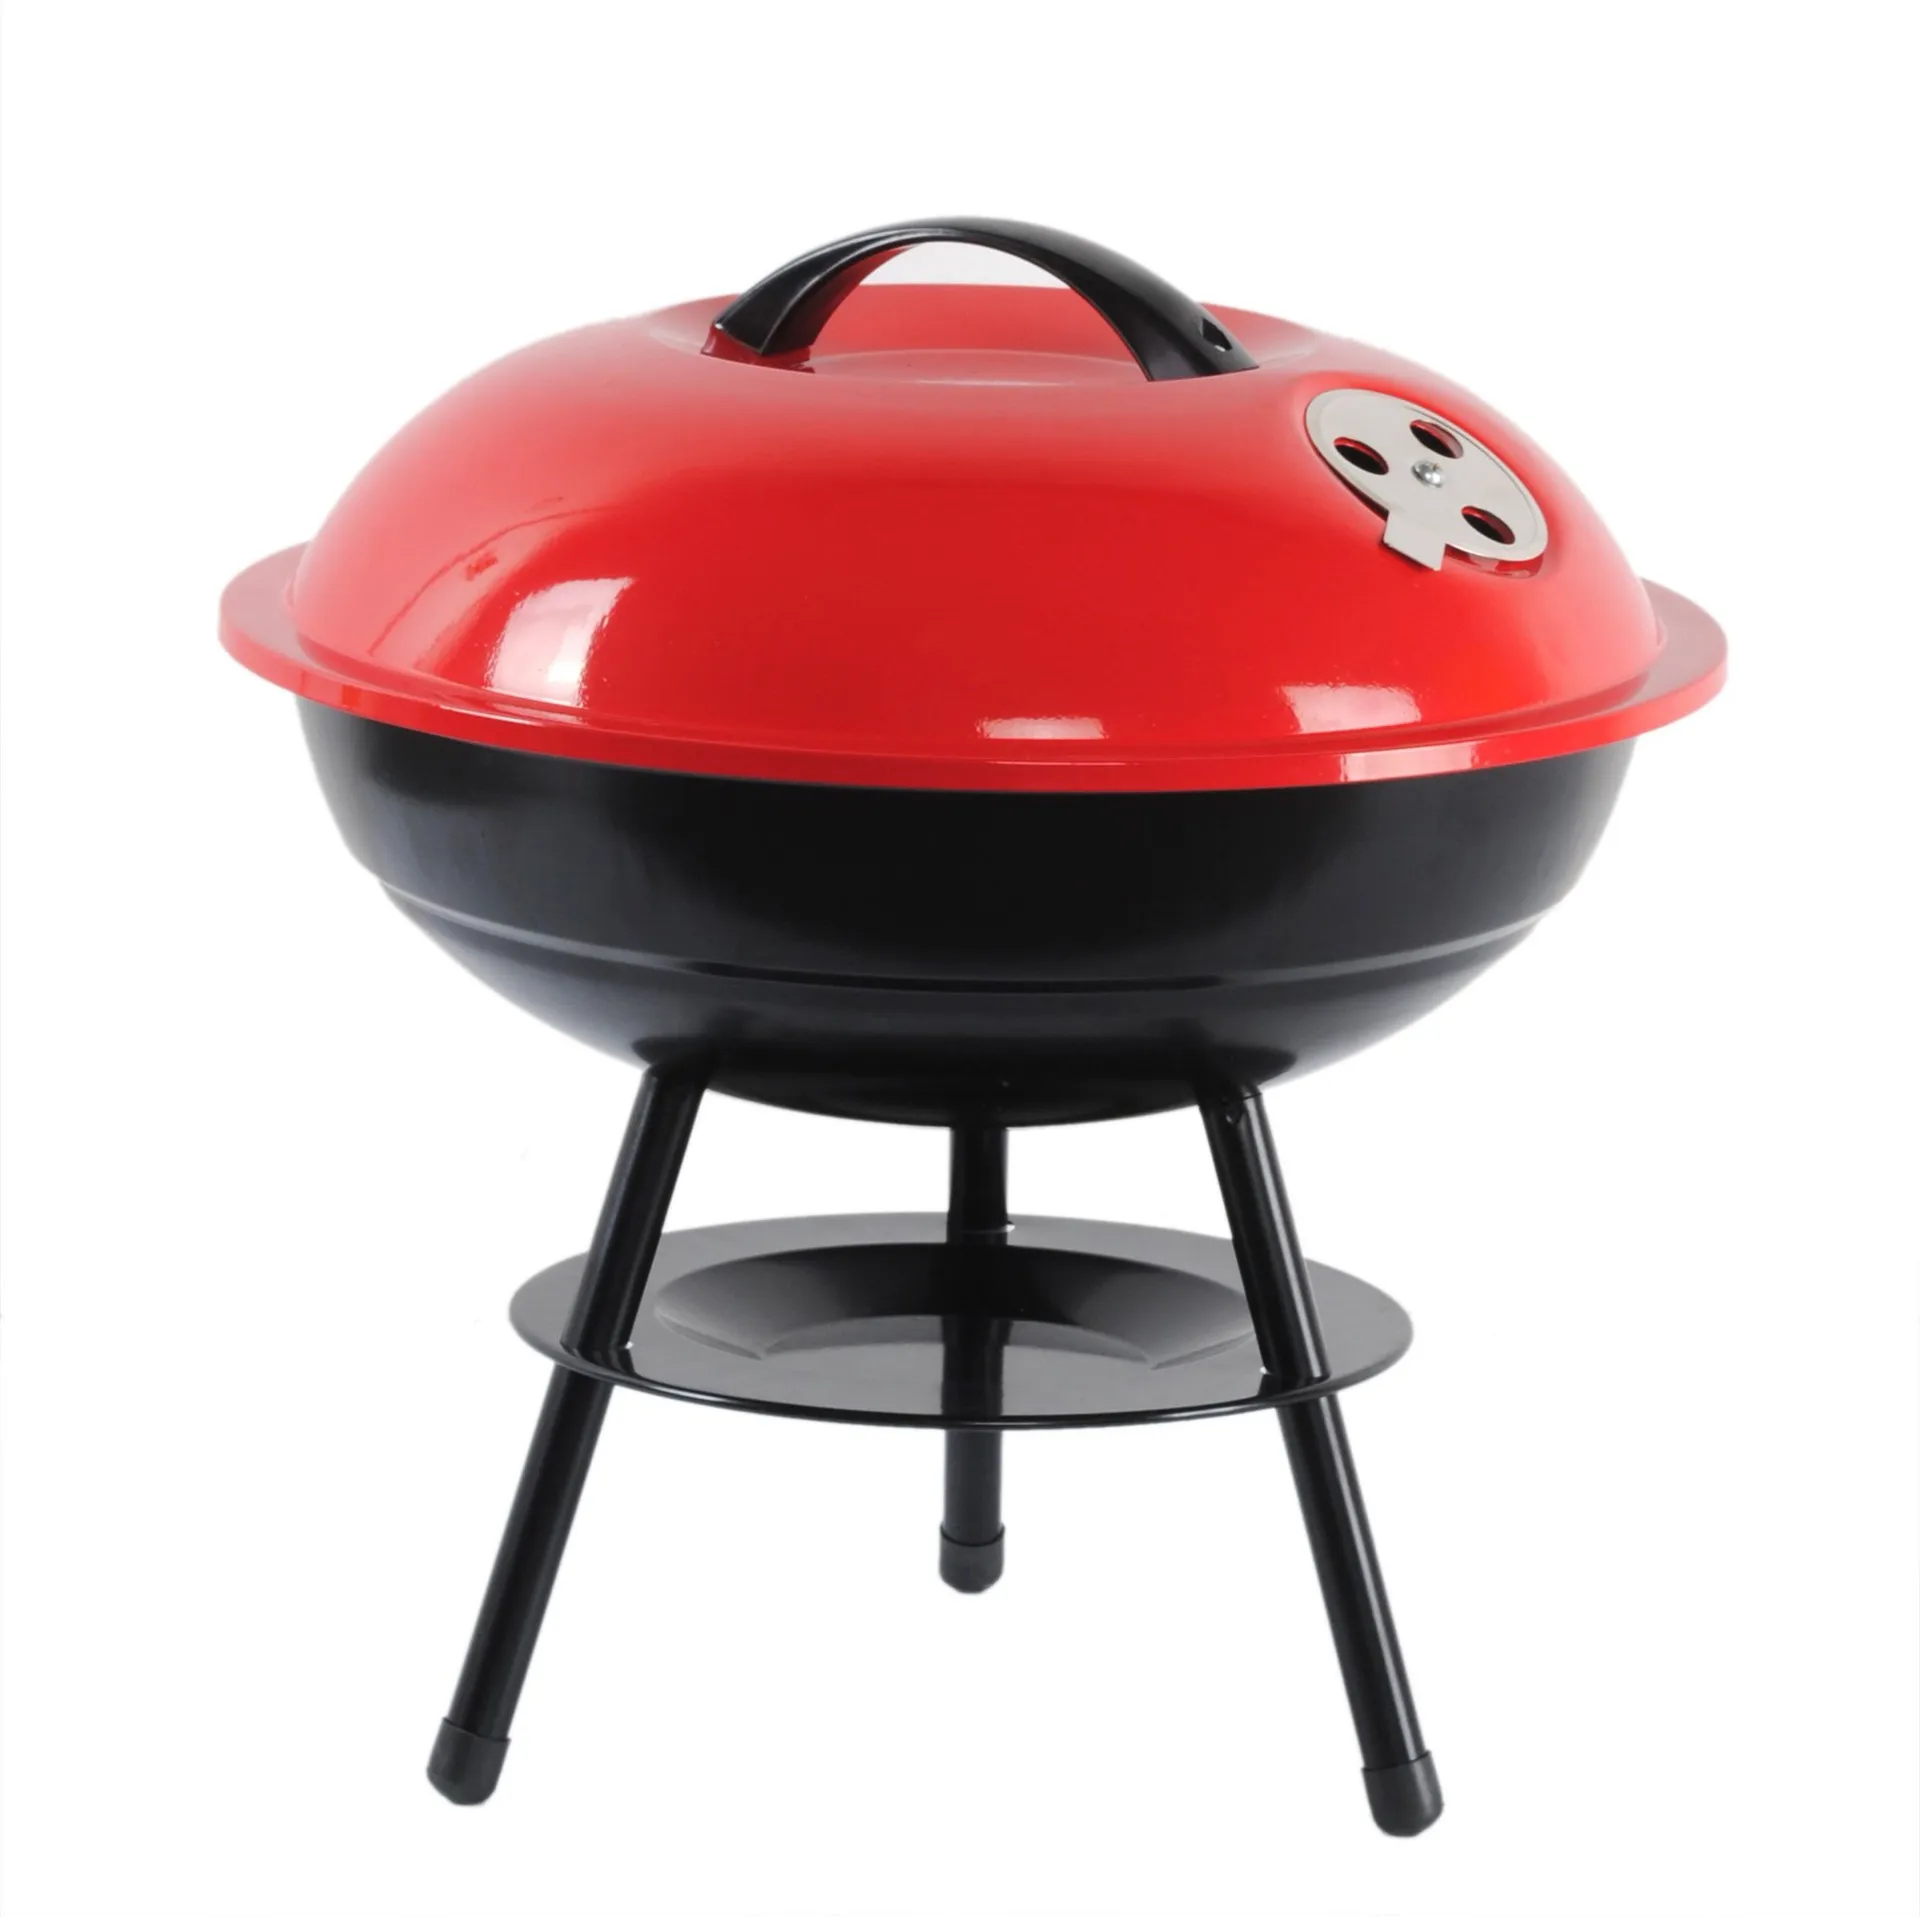 

Korean Portable Ceramic Outdoor Camping Smoker Burner Oven Charcoal Barbecue BBQ Grills, Black/red